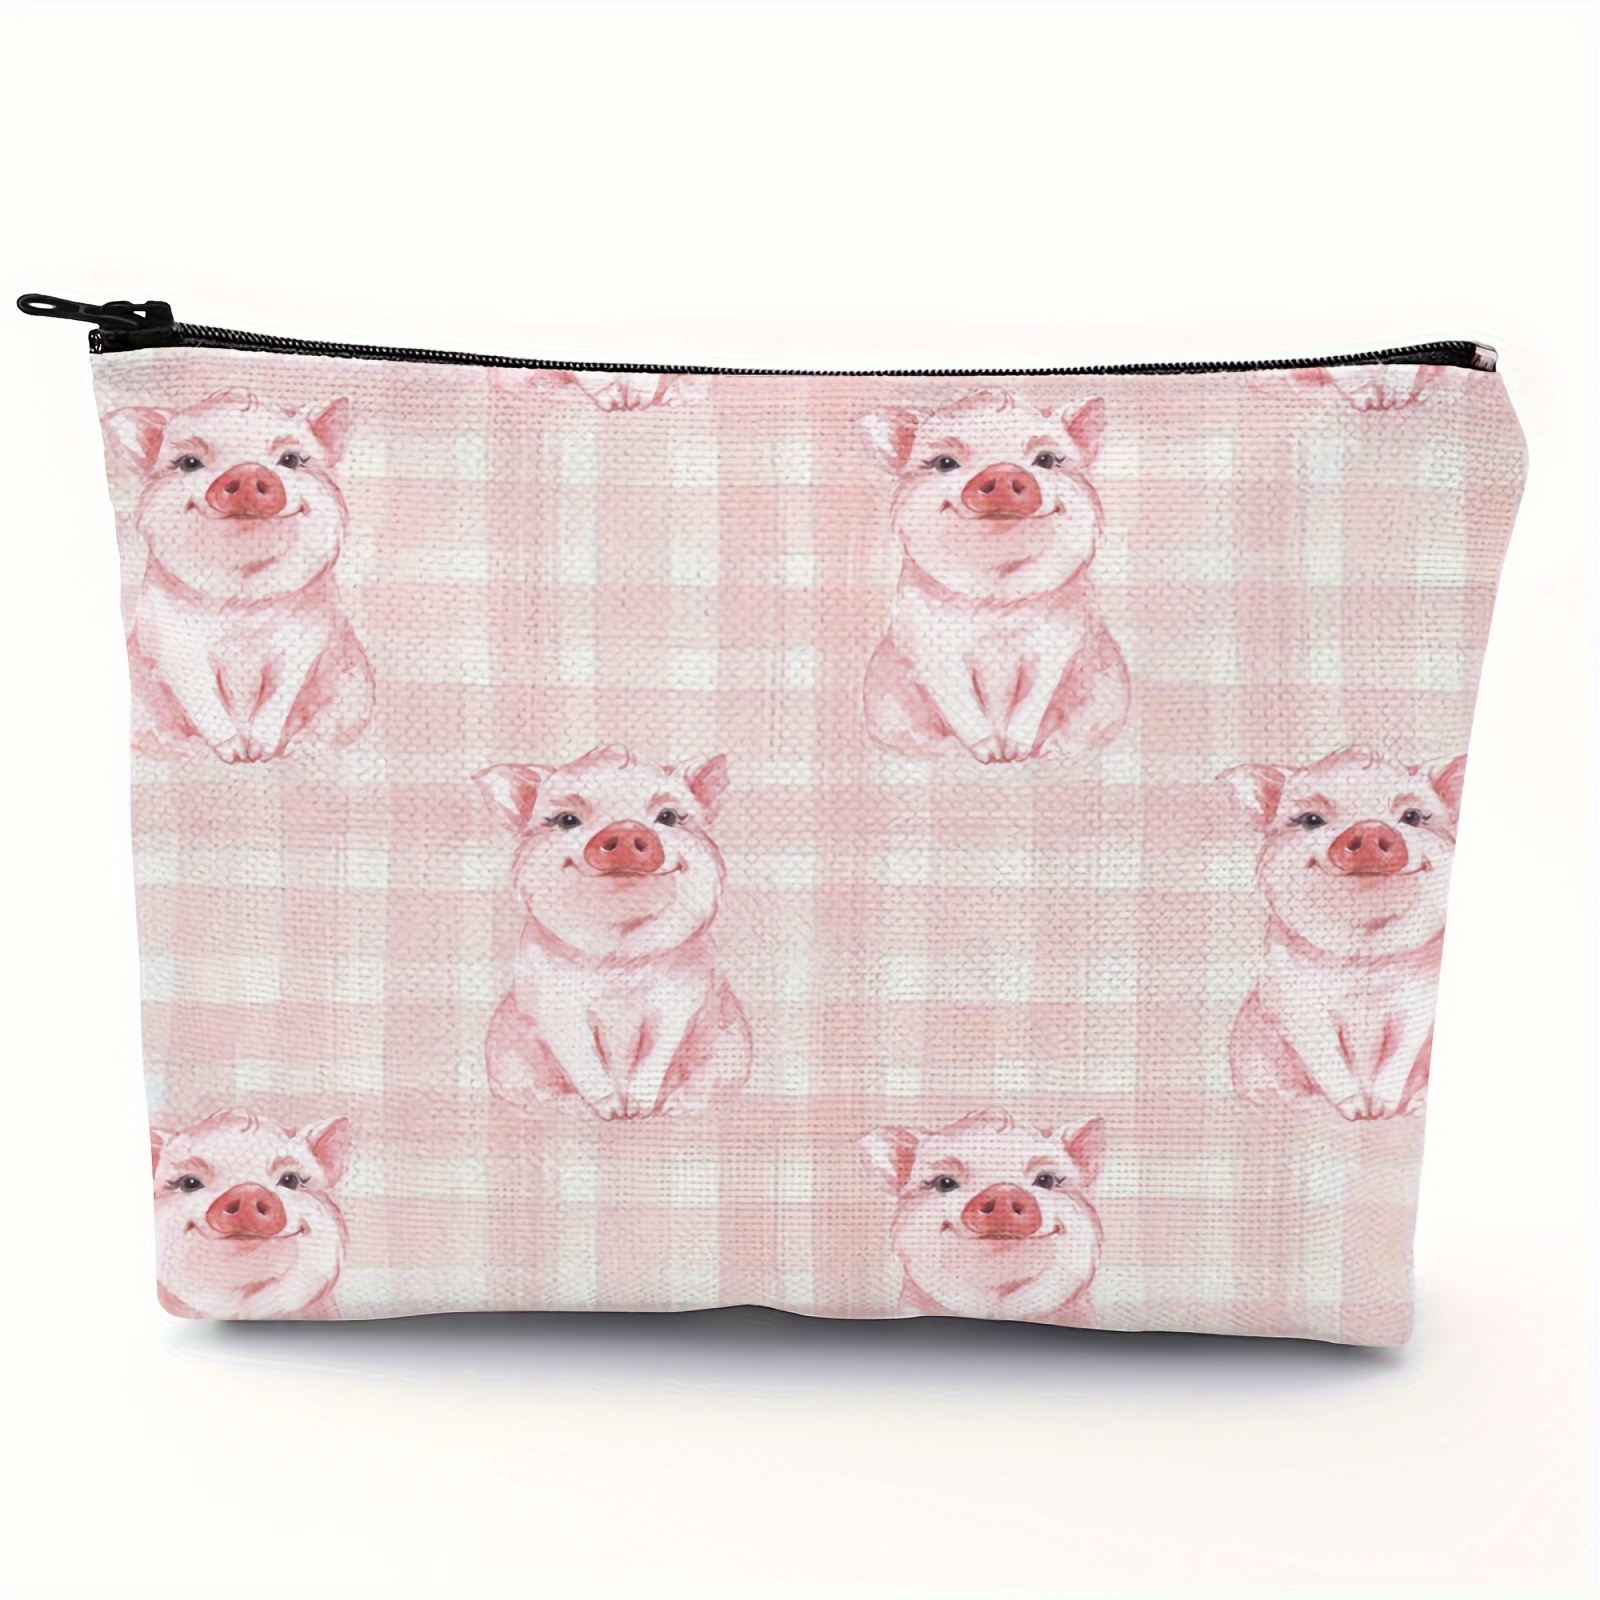 

Pig Makeup Bag Zipper Pouch, Polyester Cosmetic Travel Bag, Toiletry Case Multi Functional Pouch Gifts For